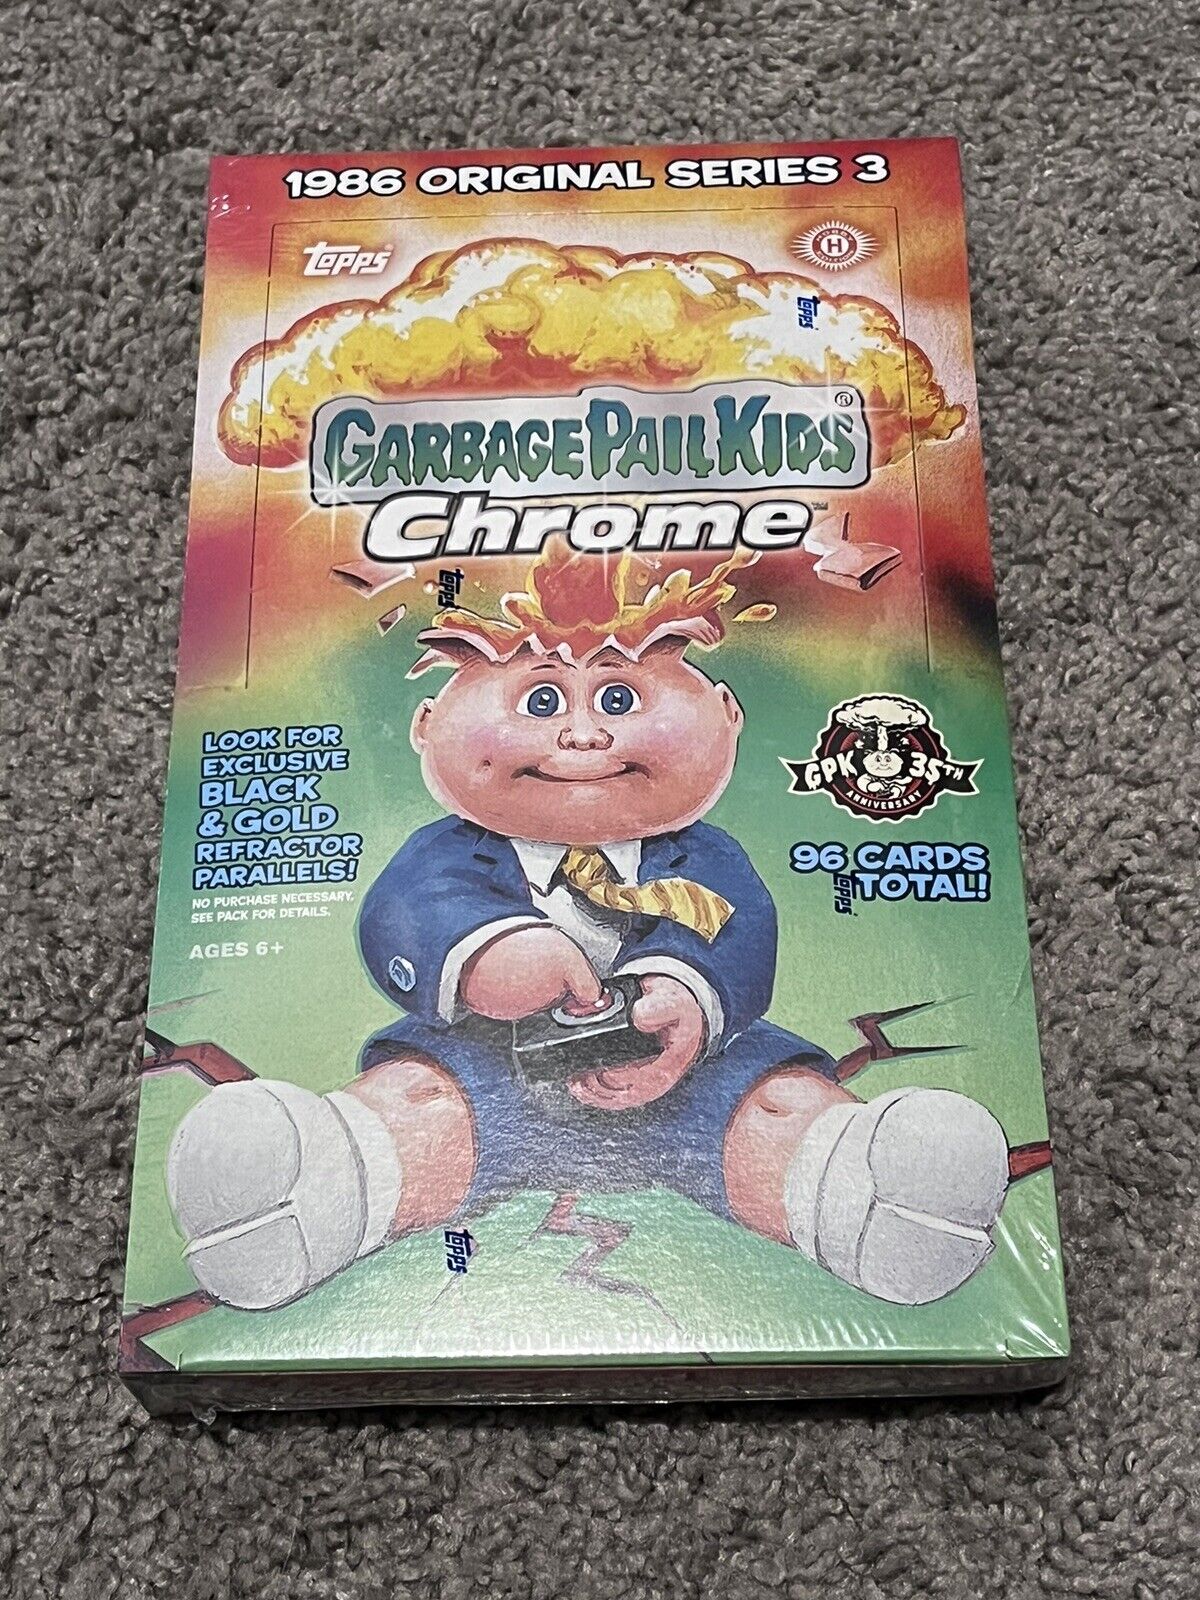 2020 TOPPS Garbage Pail Kids CHROME Series 3 Factory Sealed HOBBY Box REFRACTORS